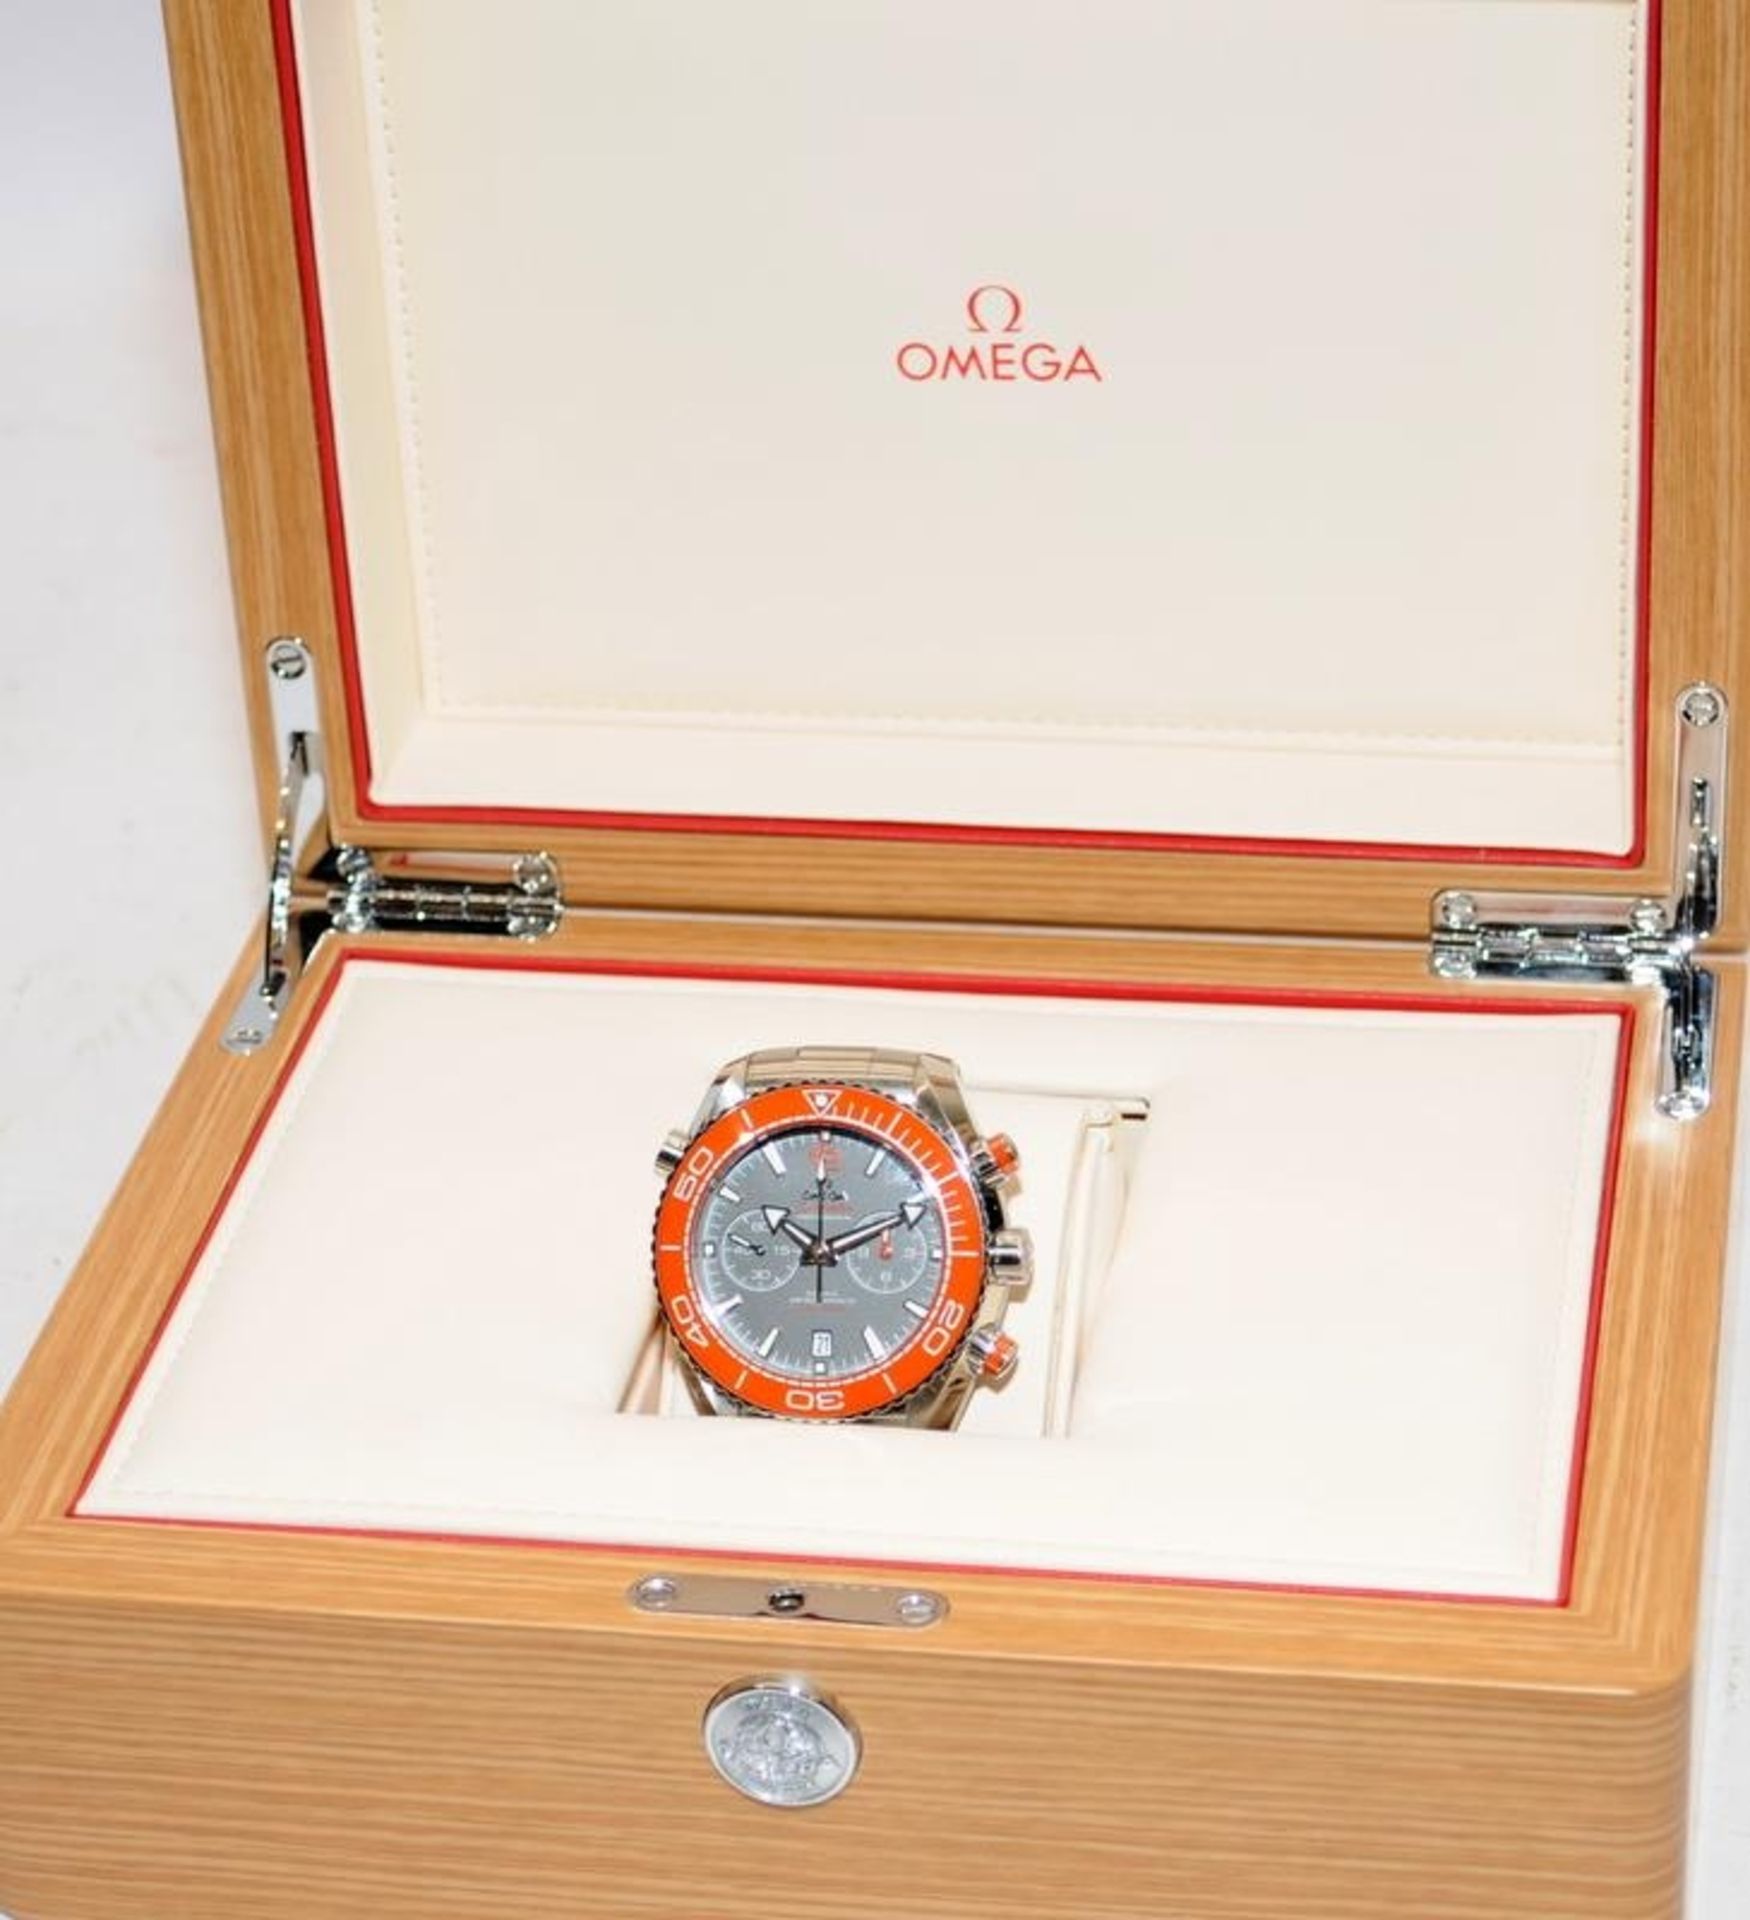 Omega Seamaster Planet Ocean, grey dial/orange bezel variant. Comes complete with papers, inner - Image 3 of 10